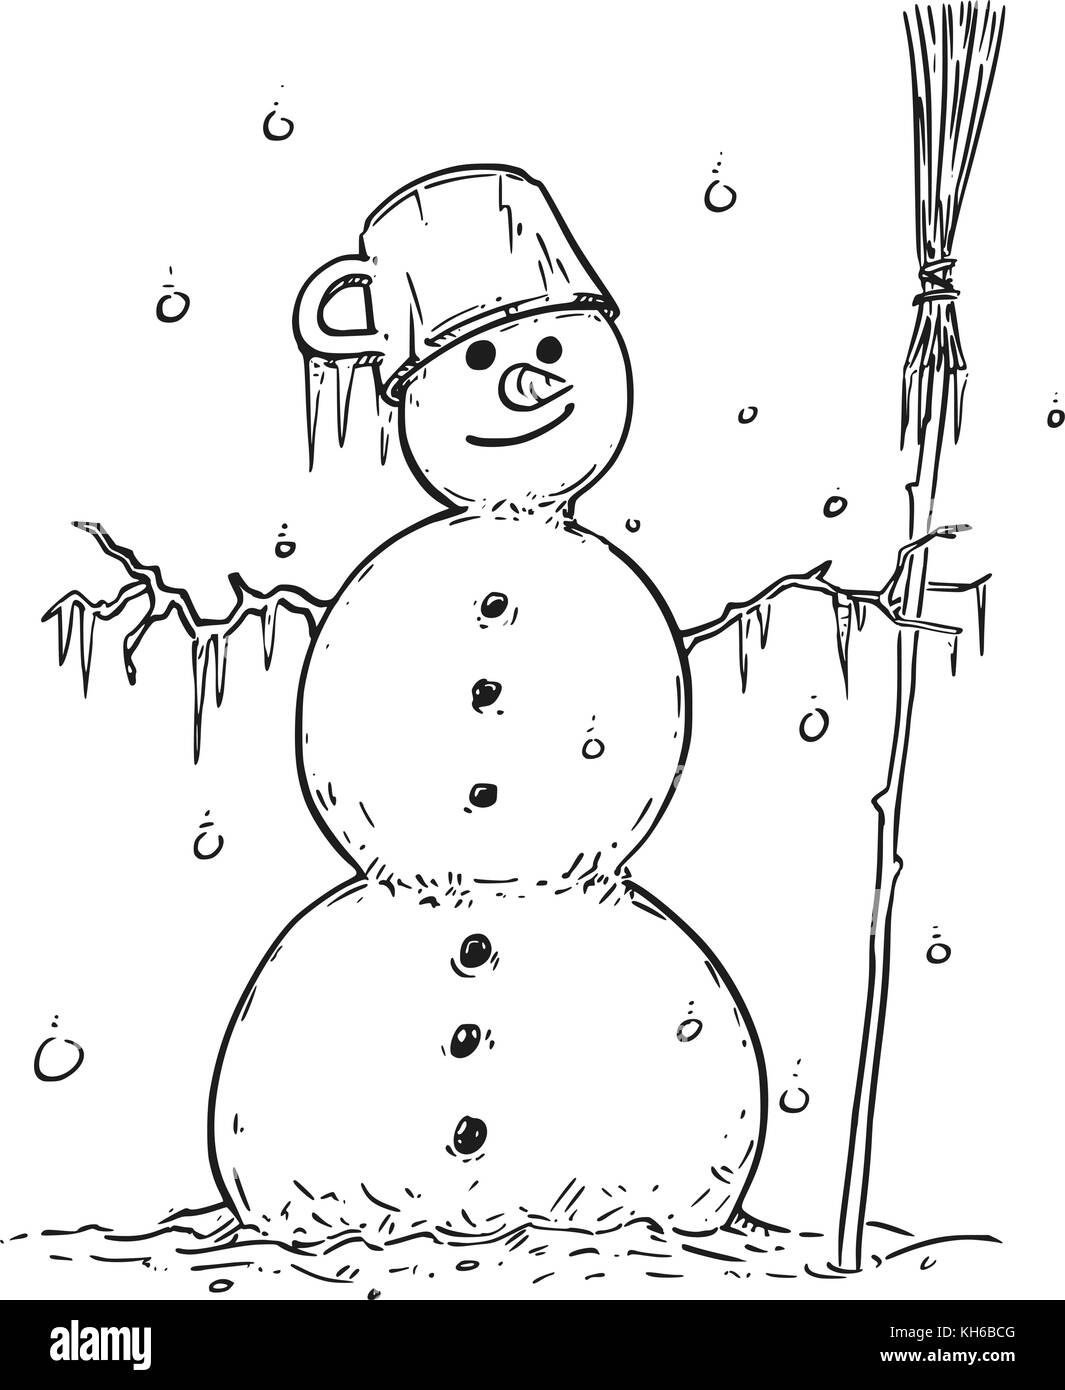 Cartoon drawing illustration of smiling snowman with broom and pot on the head. Stock Vector